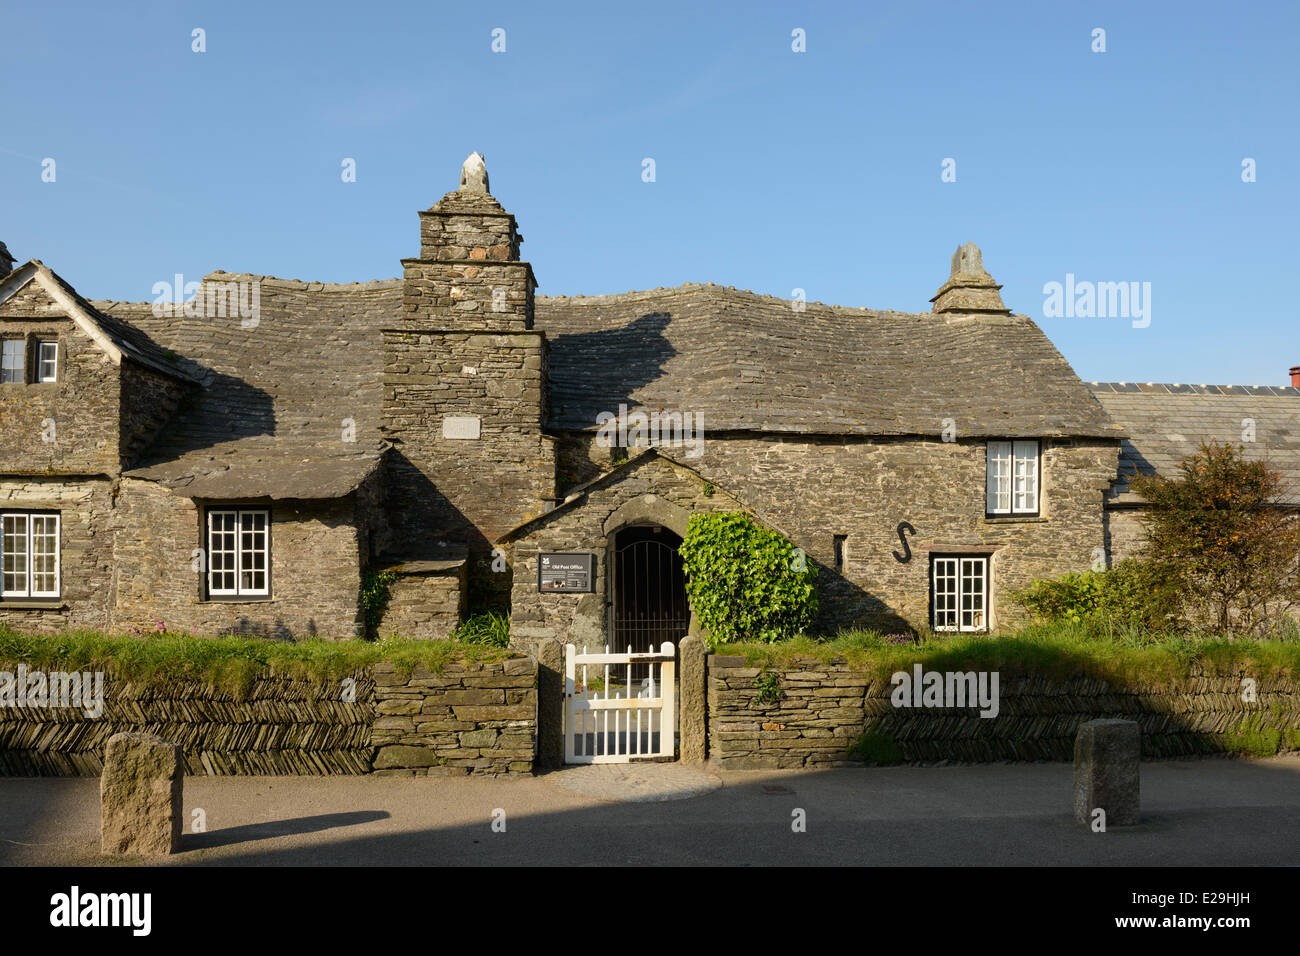 The Old Post Office at Tintagel, Cornwall. Stock Photo